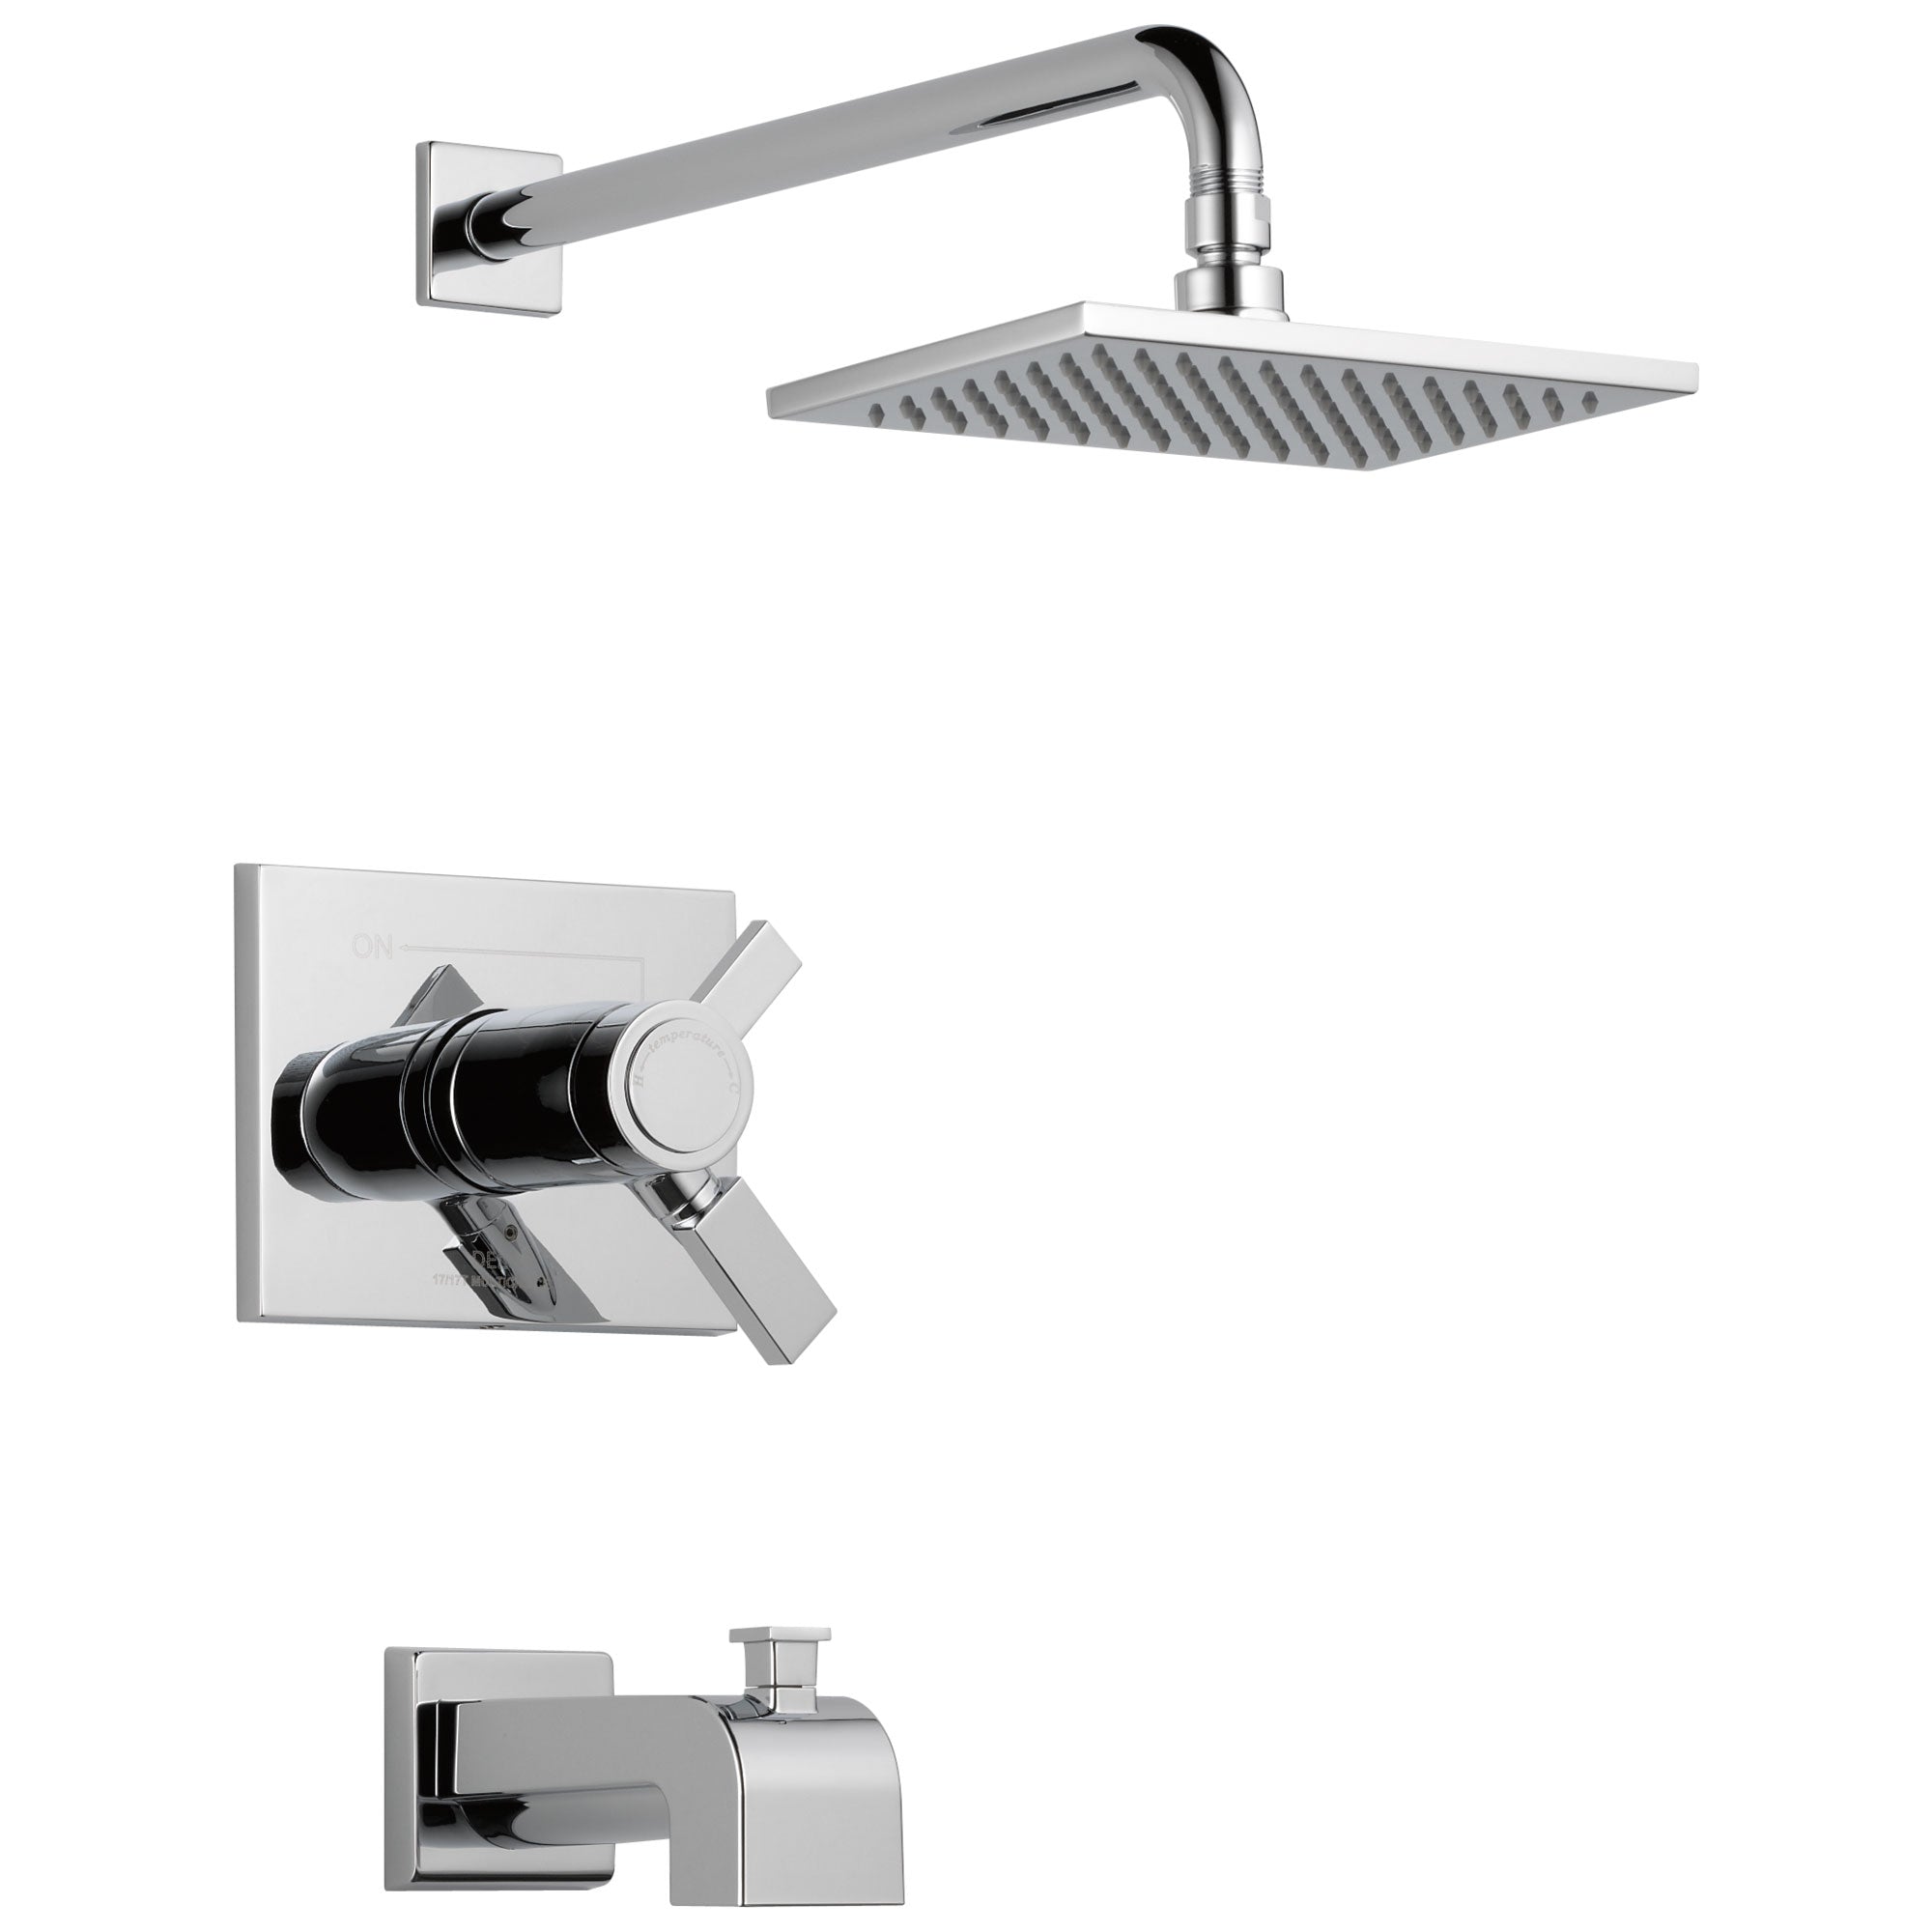 Delta Vero Chrome Finish Water Efficient Thermostatic Tub & Shower Faucet Combination Includes 17T Cartridge, Handles, and Valve without Stops D3235V